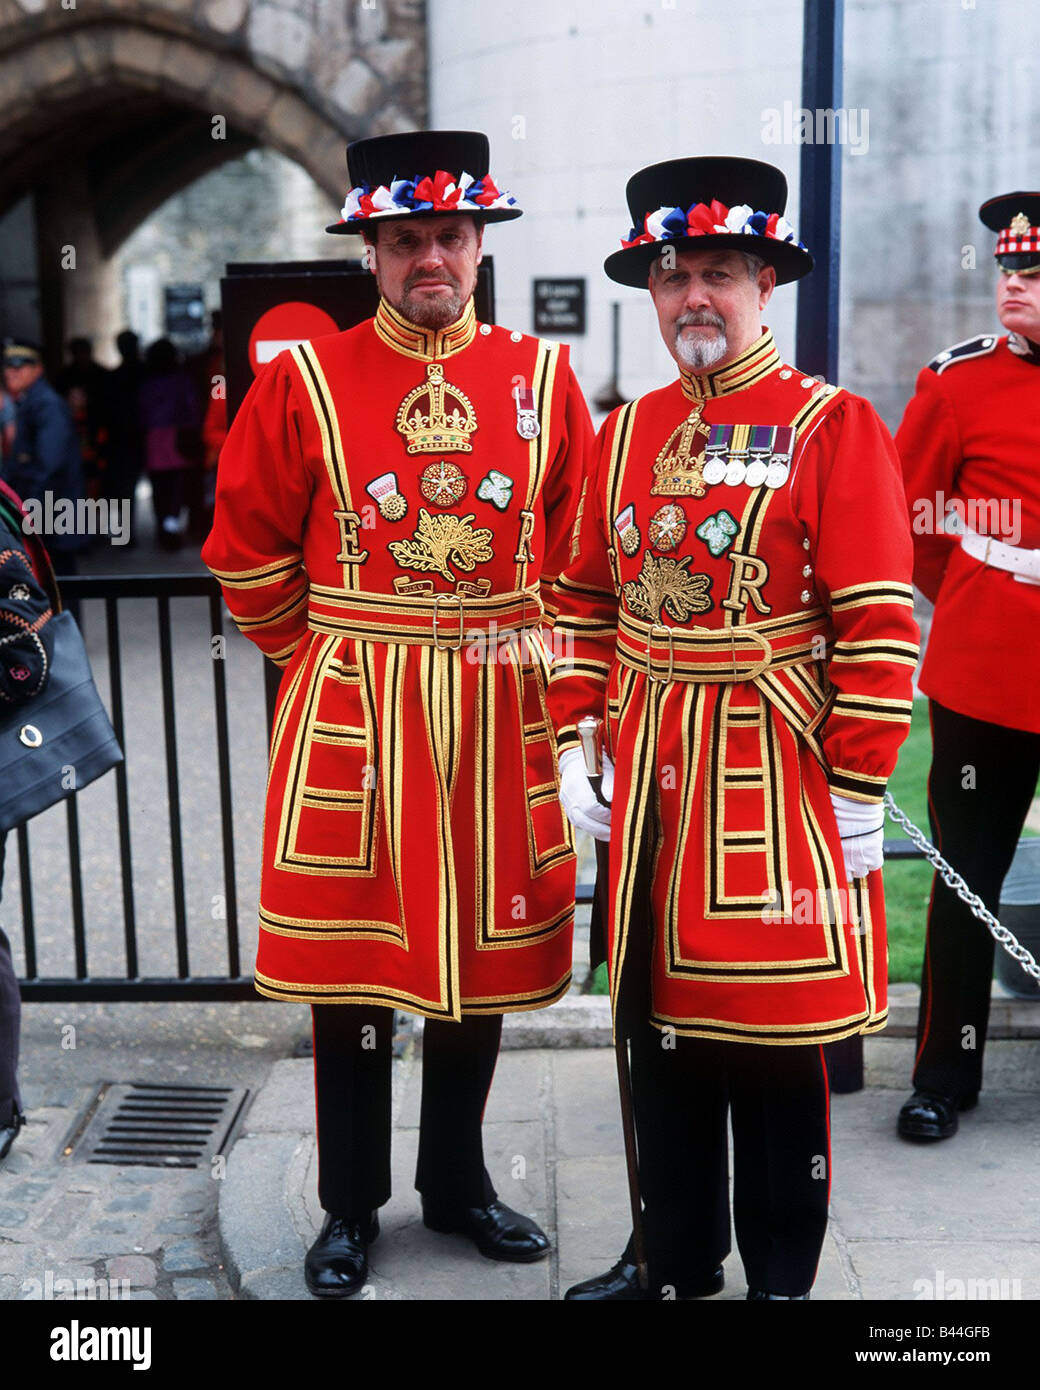 Beefeater Uniform High Resolution Stock Photography and Images - Alamy